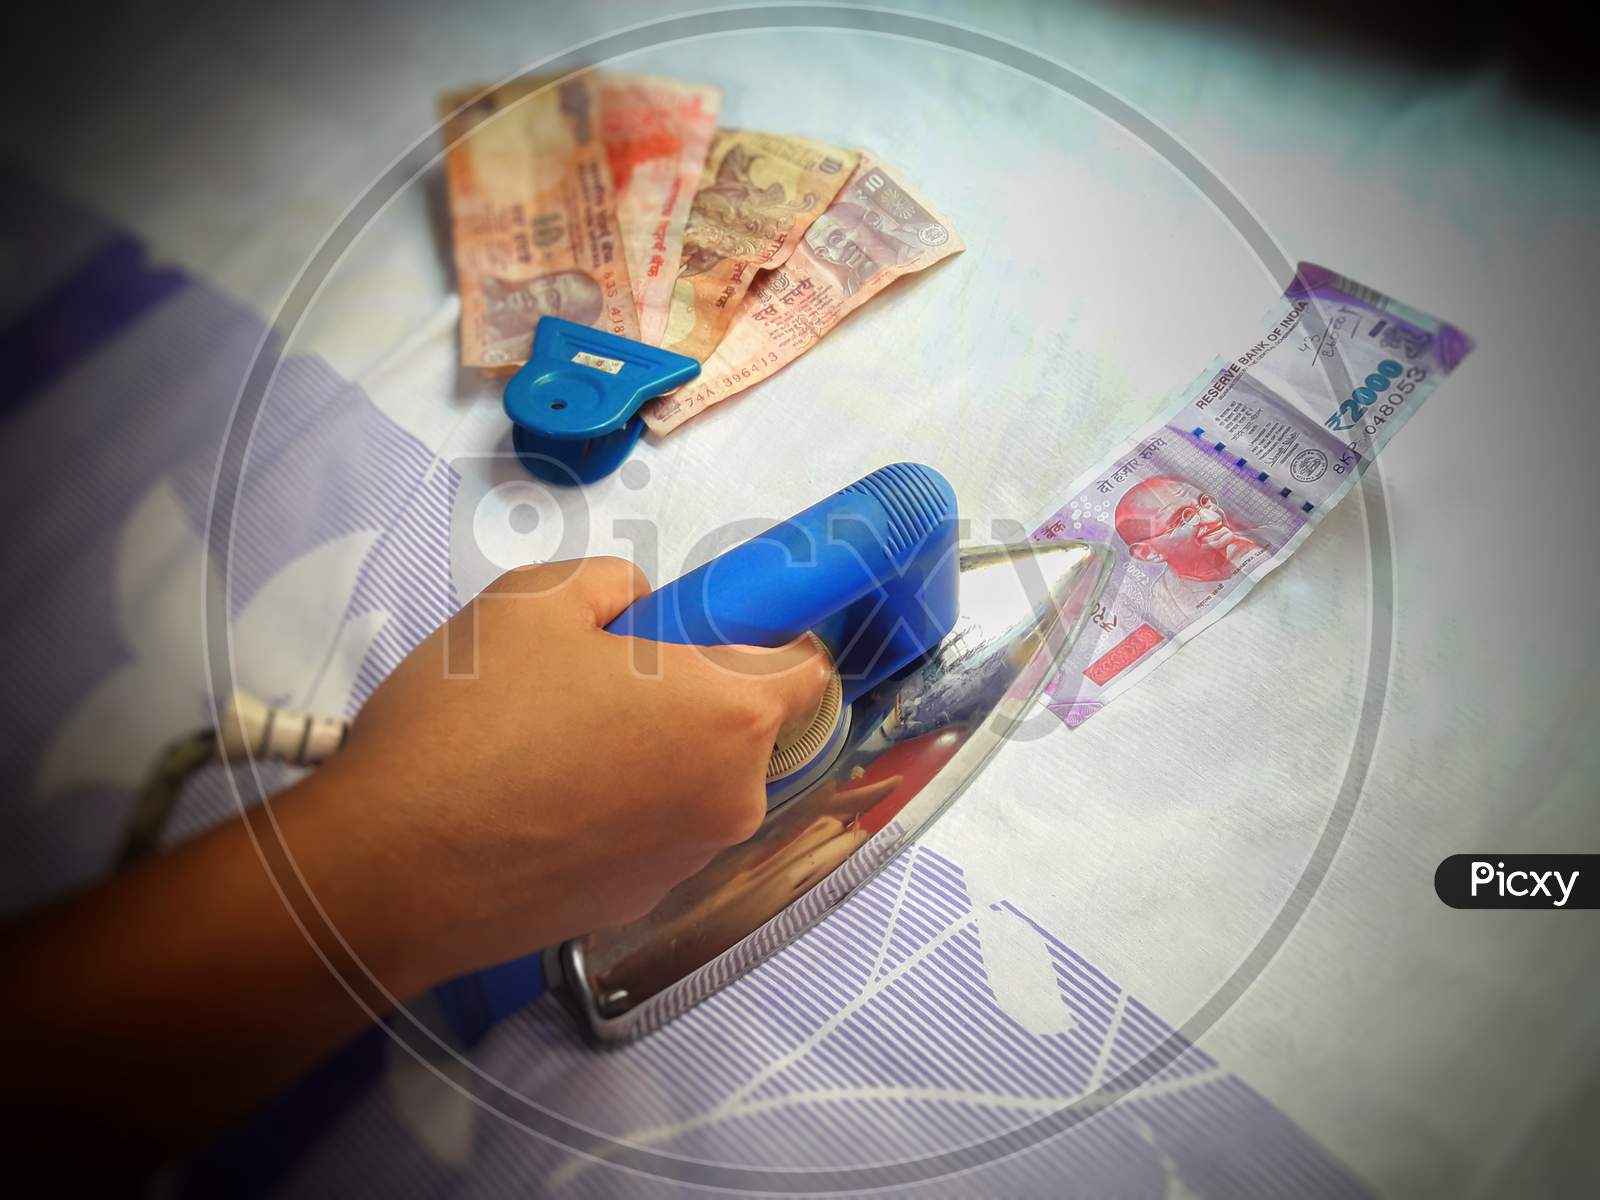 Sanitization of indian currency note by pressing hot iron to avoid contamination from covid 19